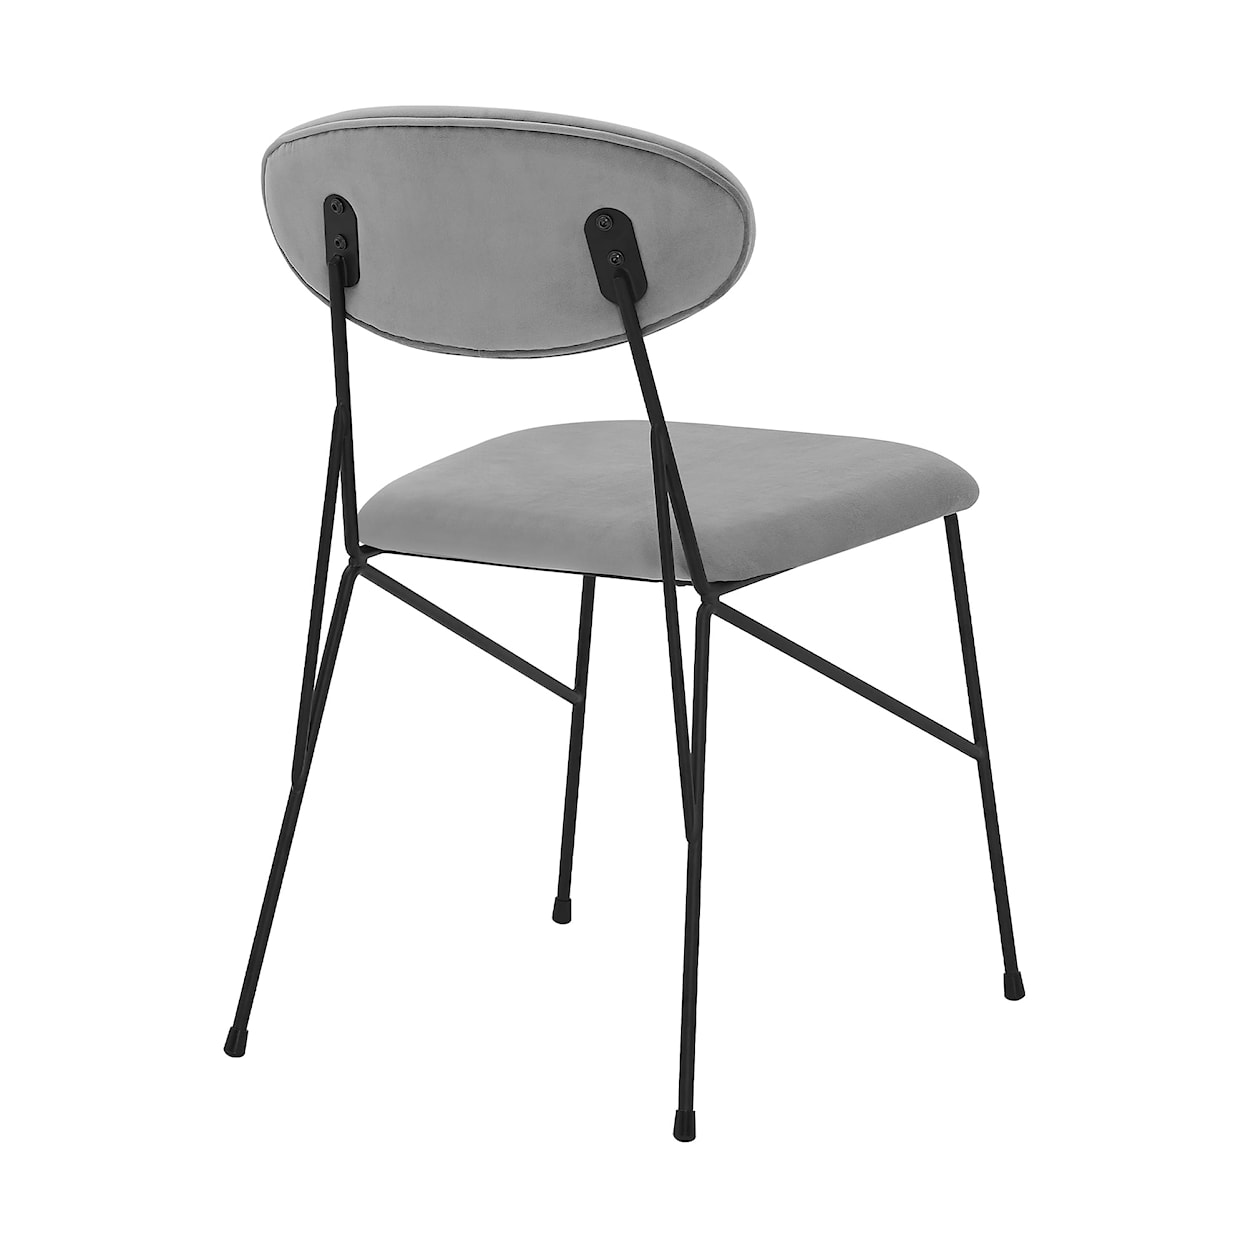 Armen Living Alice Set of 2 Side Chairs